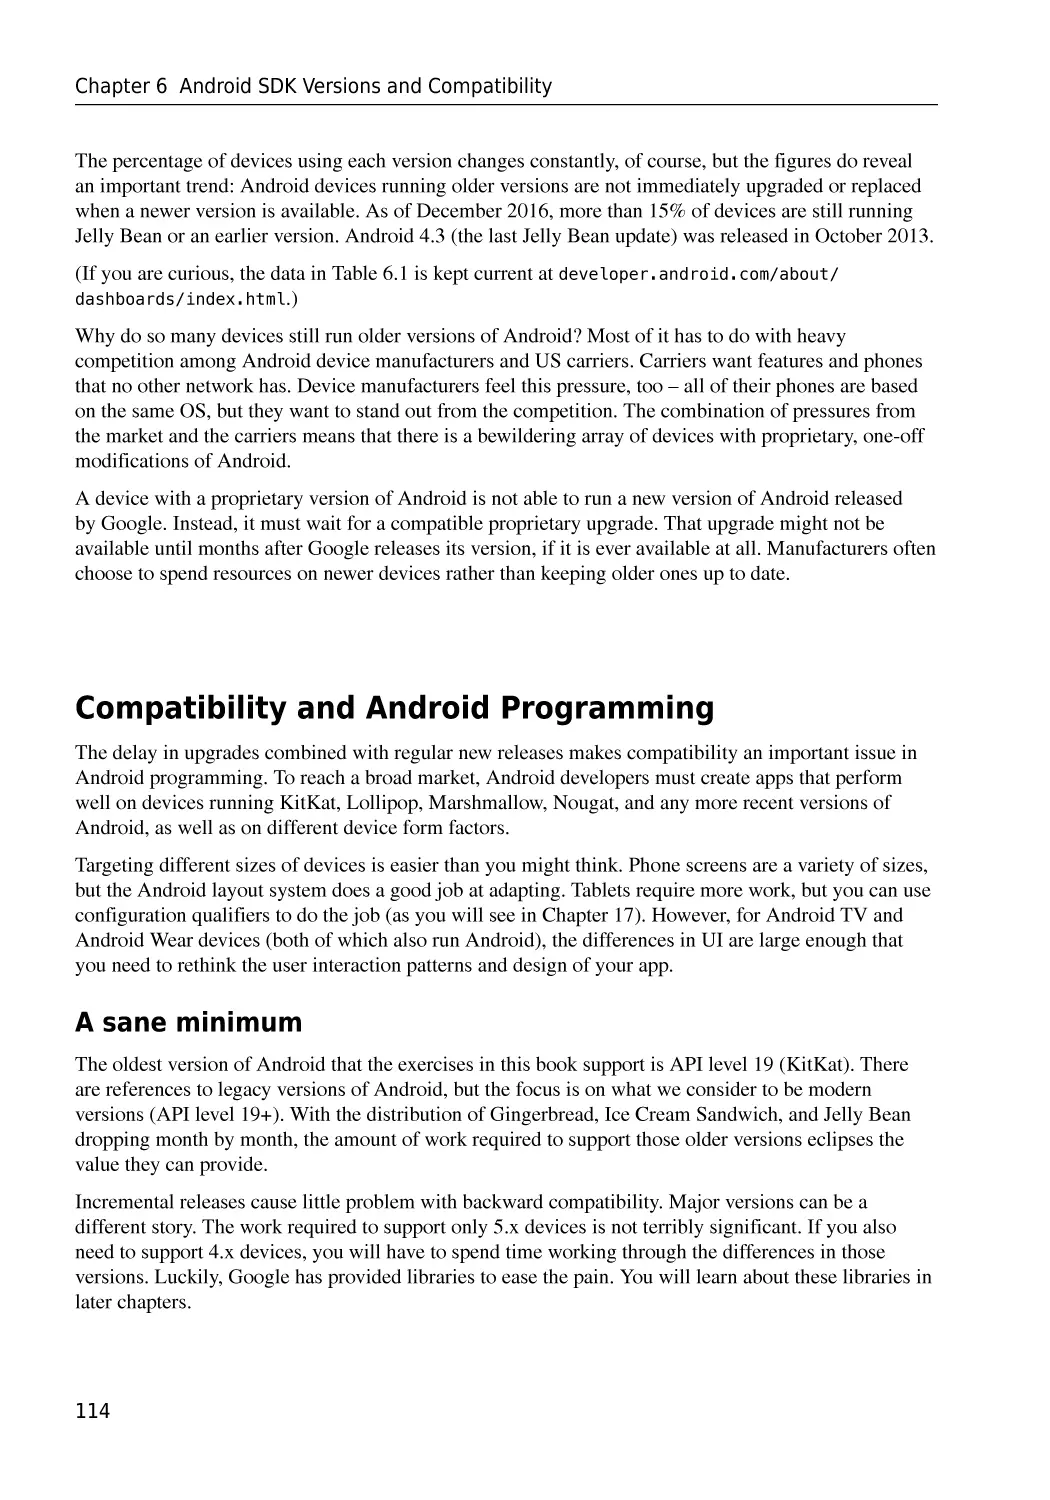 Compatibility and Android Programming
A sane minimum